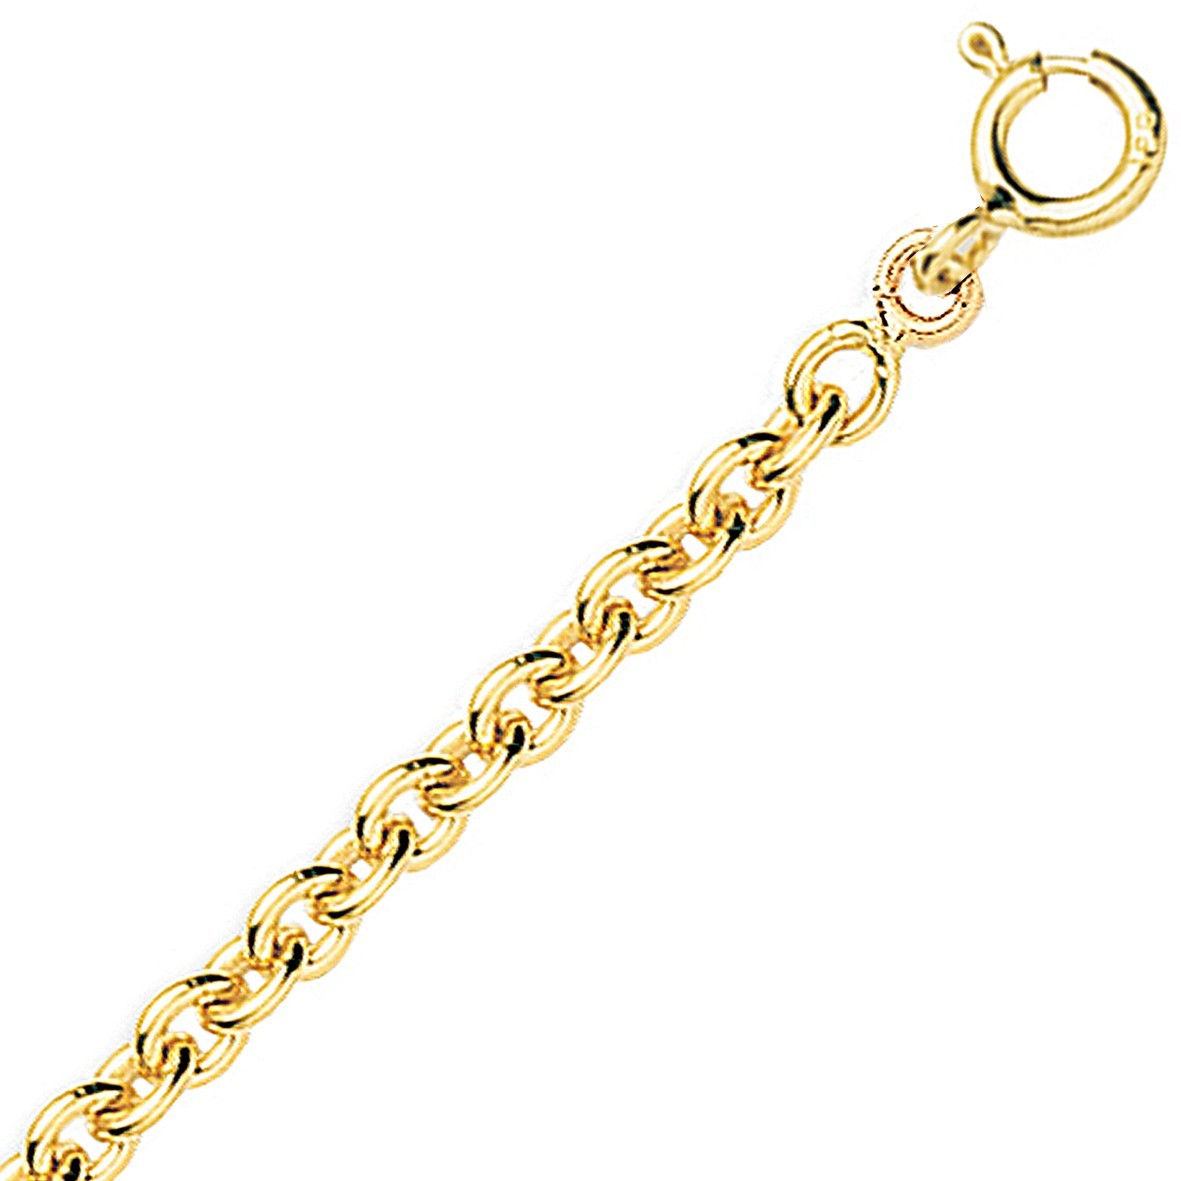 Chaine or jaune 18k maille forçat ronde 2,38mm